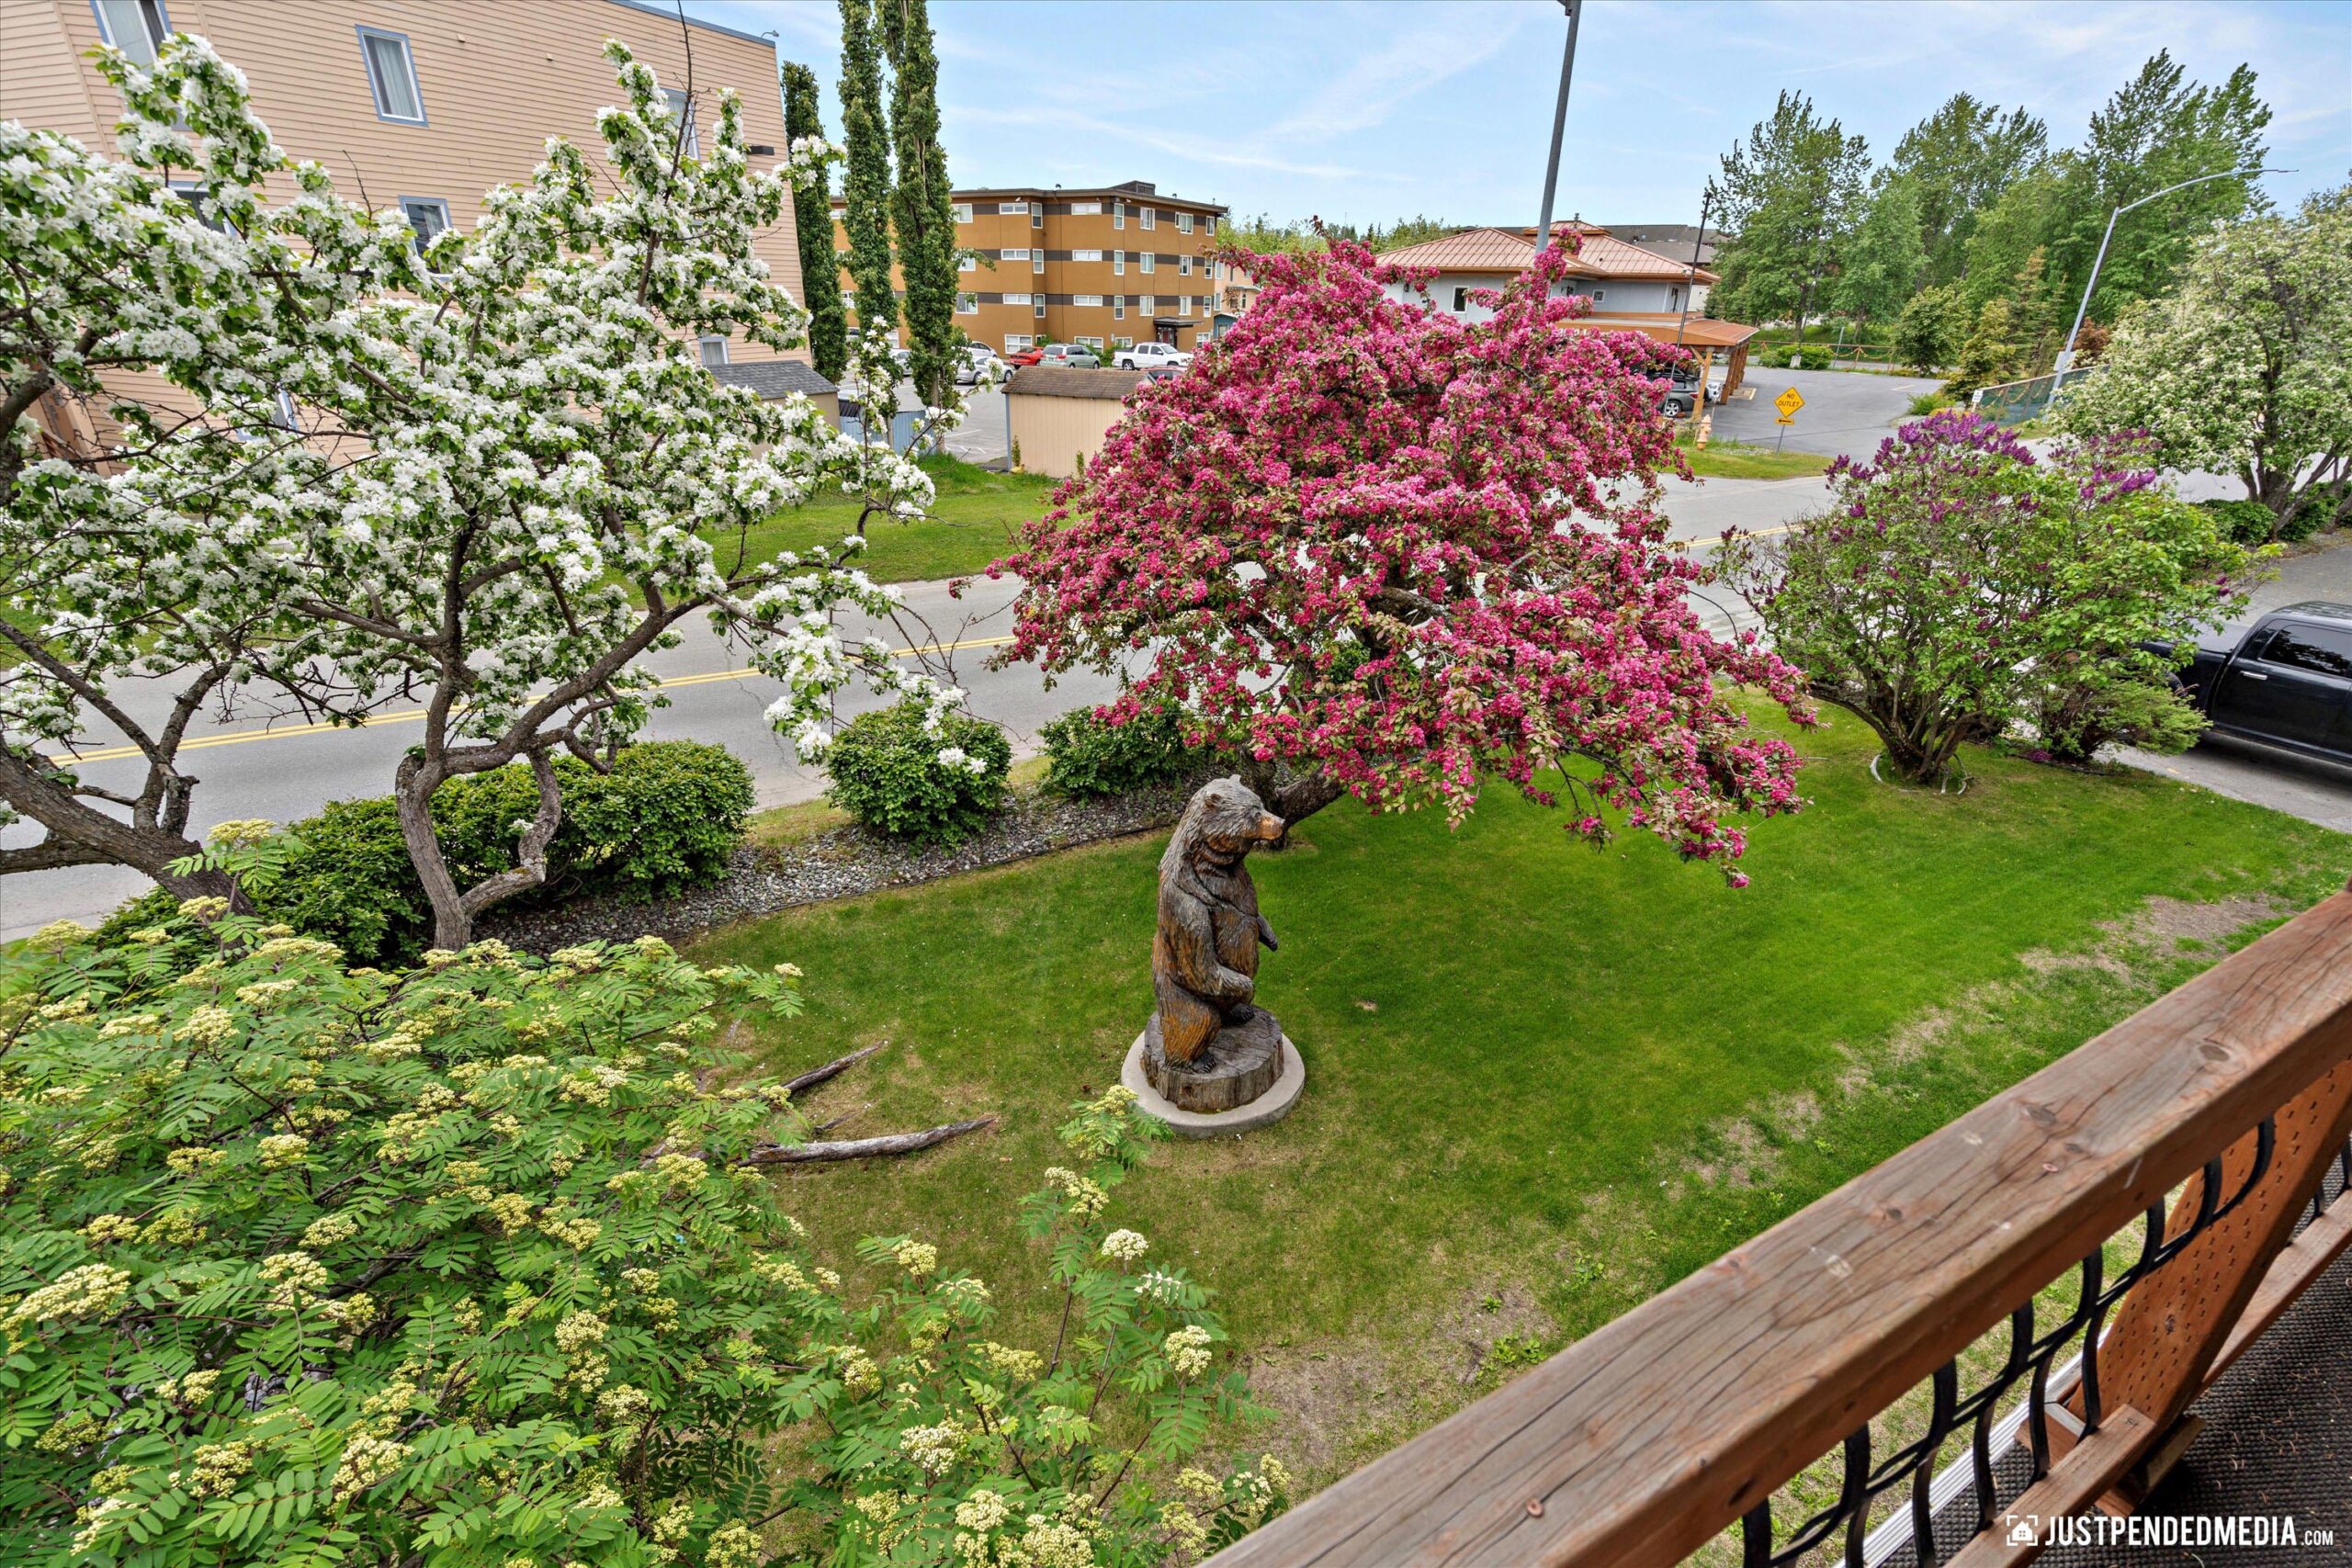 A green outdoor yard area, surrounded by lush trees featuring a wooden bear sculpture